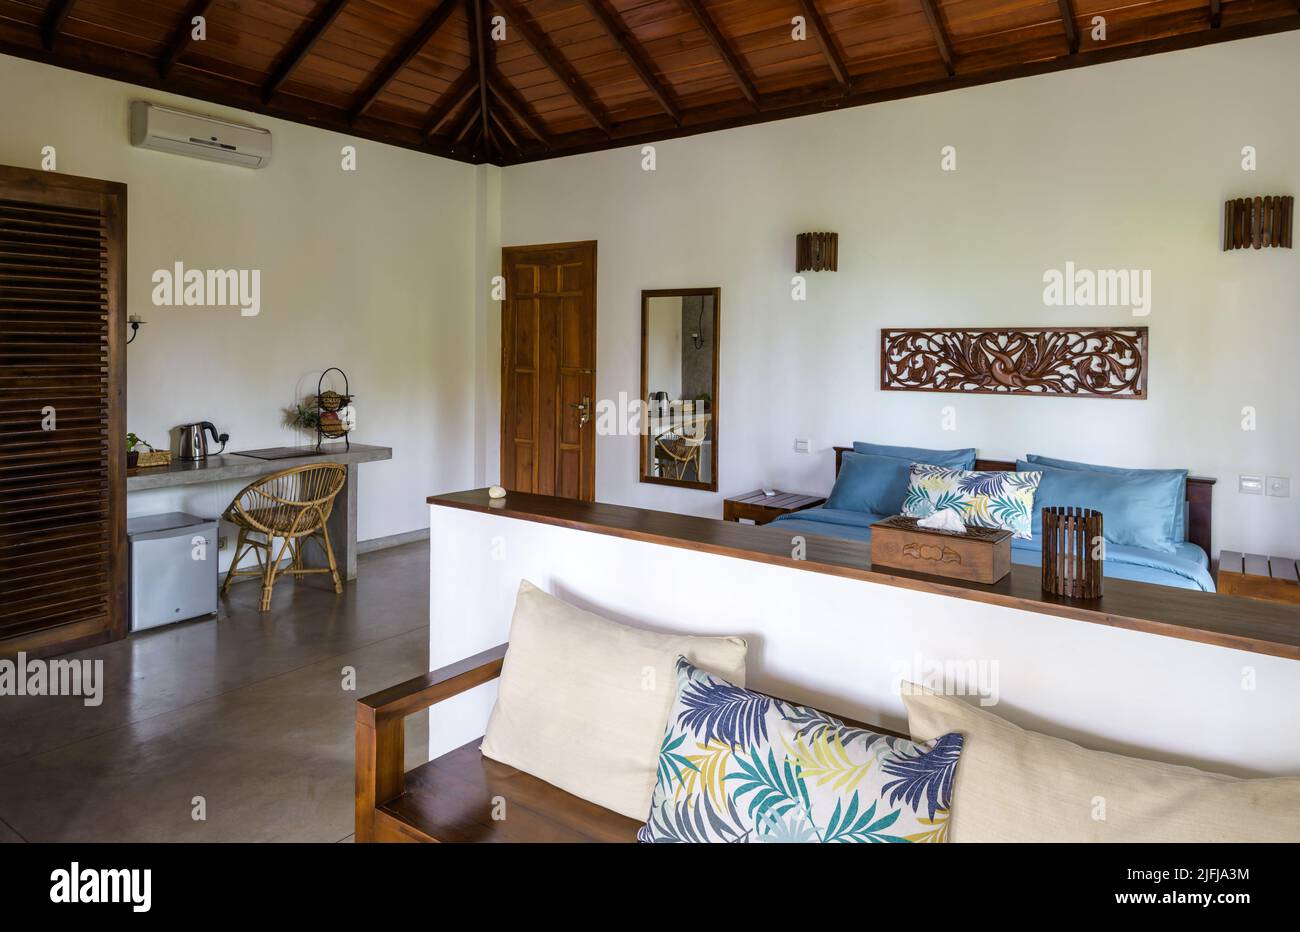 Tangalle, Sri Lanka - Nov 1, 2017: Hotel or home interior in Indian minimalist style. Inside residential house on tropical beach. Typical furniture wi Stock Photo